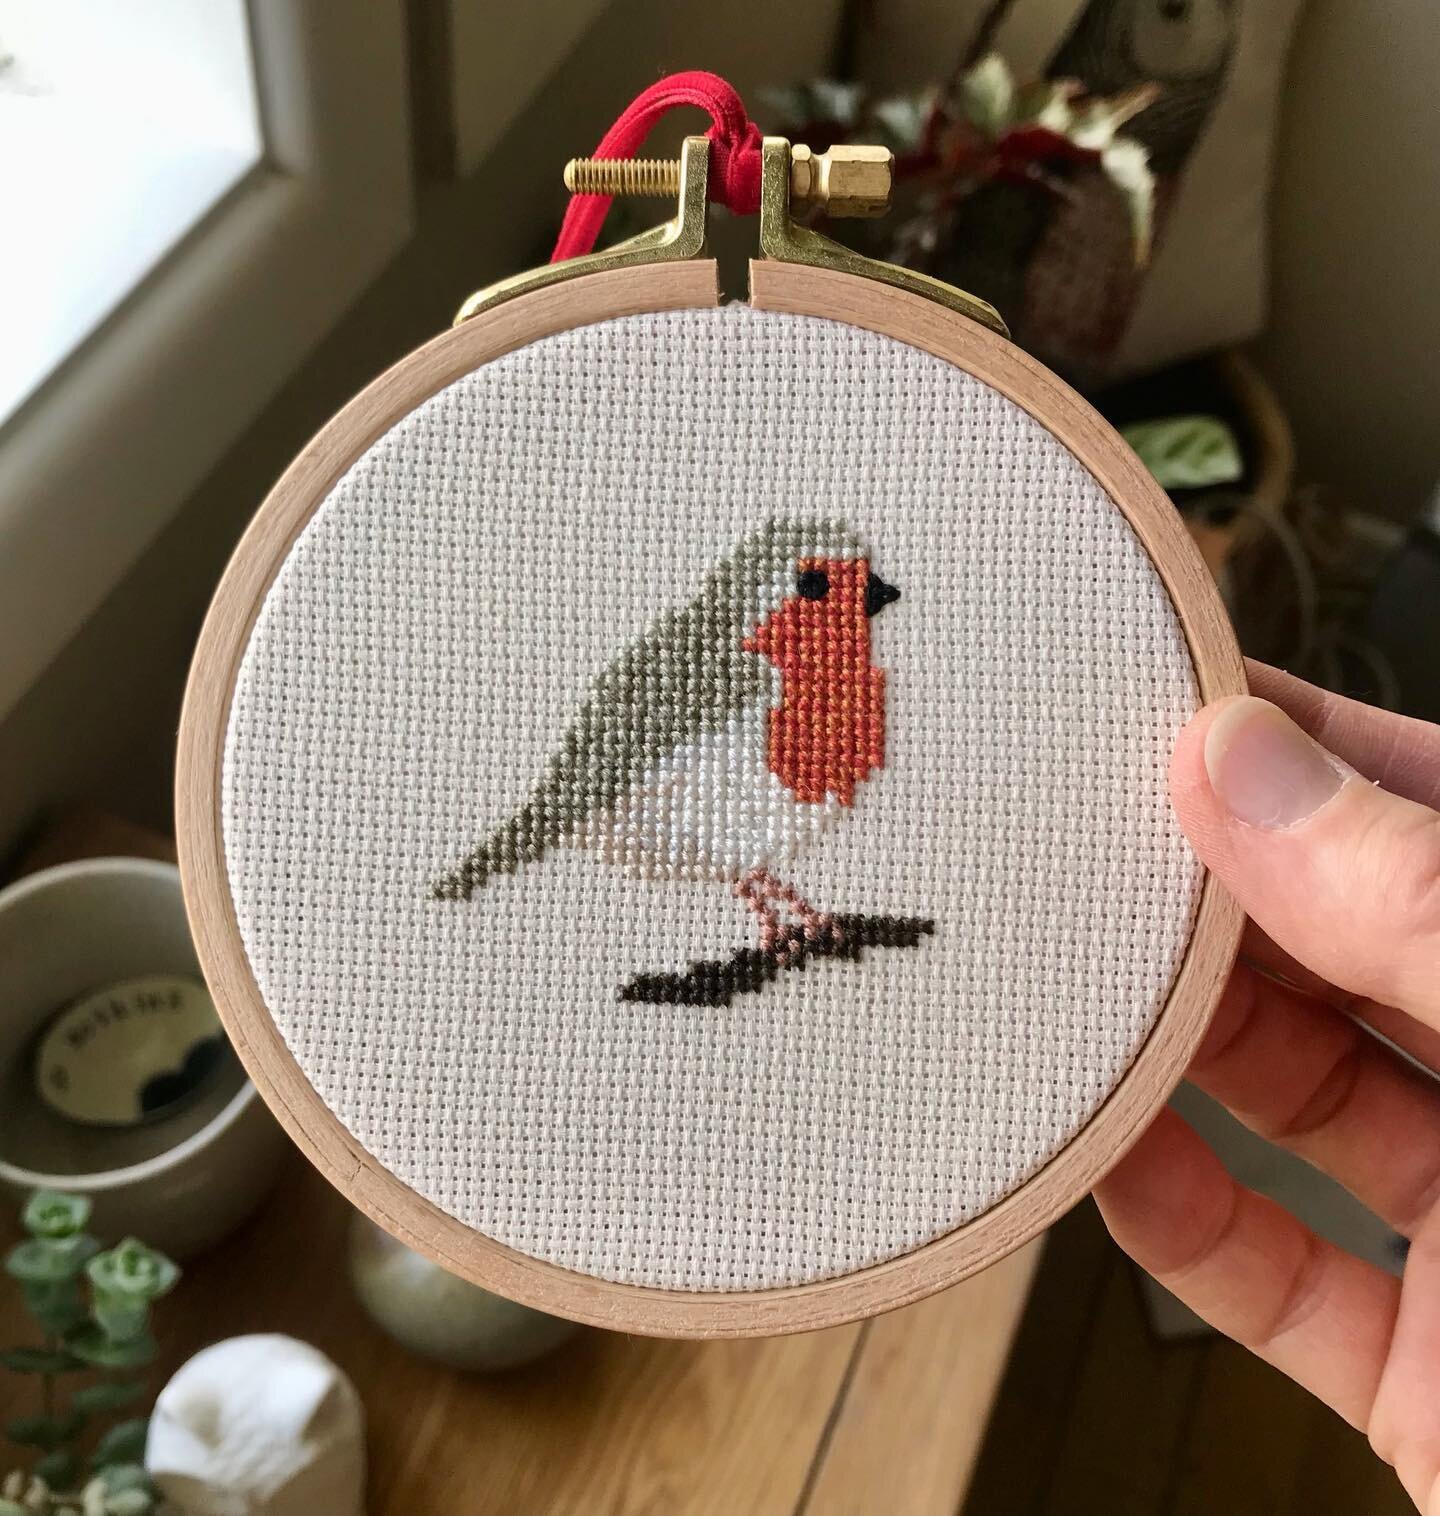 I seem to be on a cross stitch kick. A little robin for the tree 😍 Design by @hawthorntree_xs (and they have many more birds). I changed the design slightly so breast colour is a mix of orange and red.